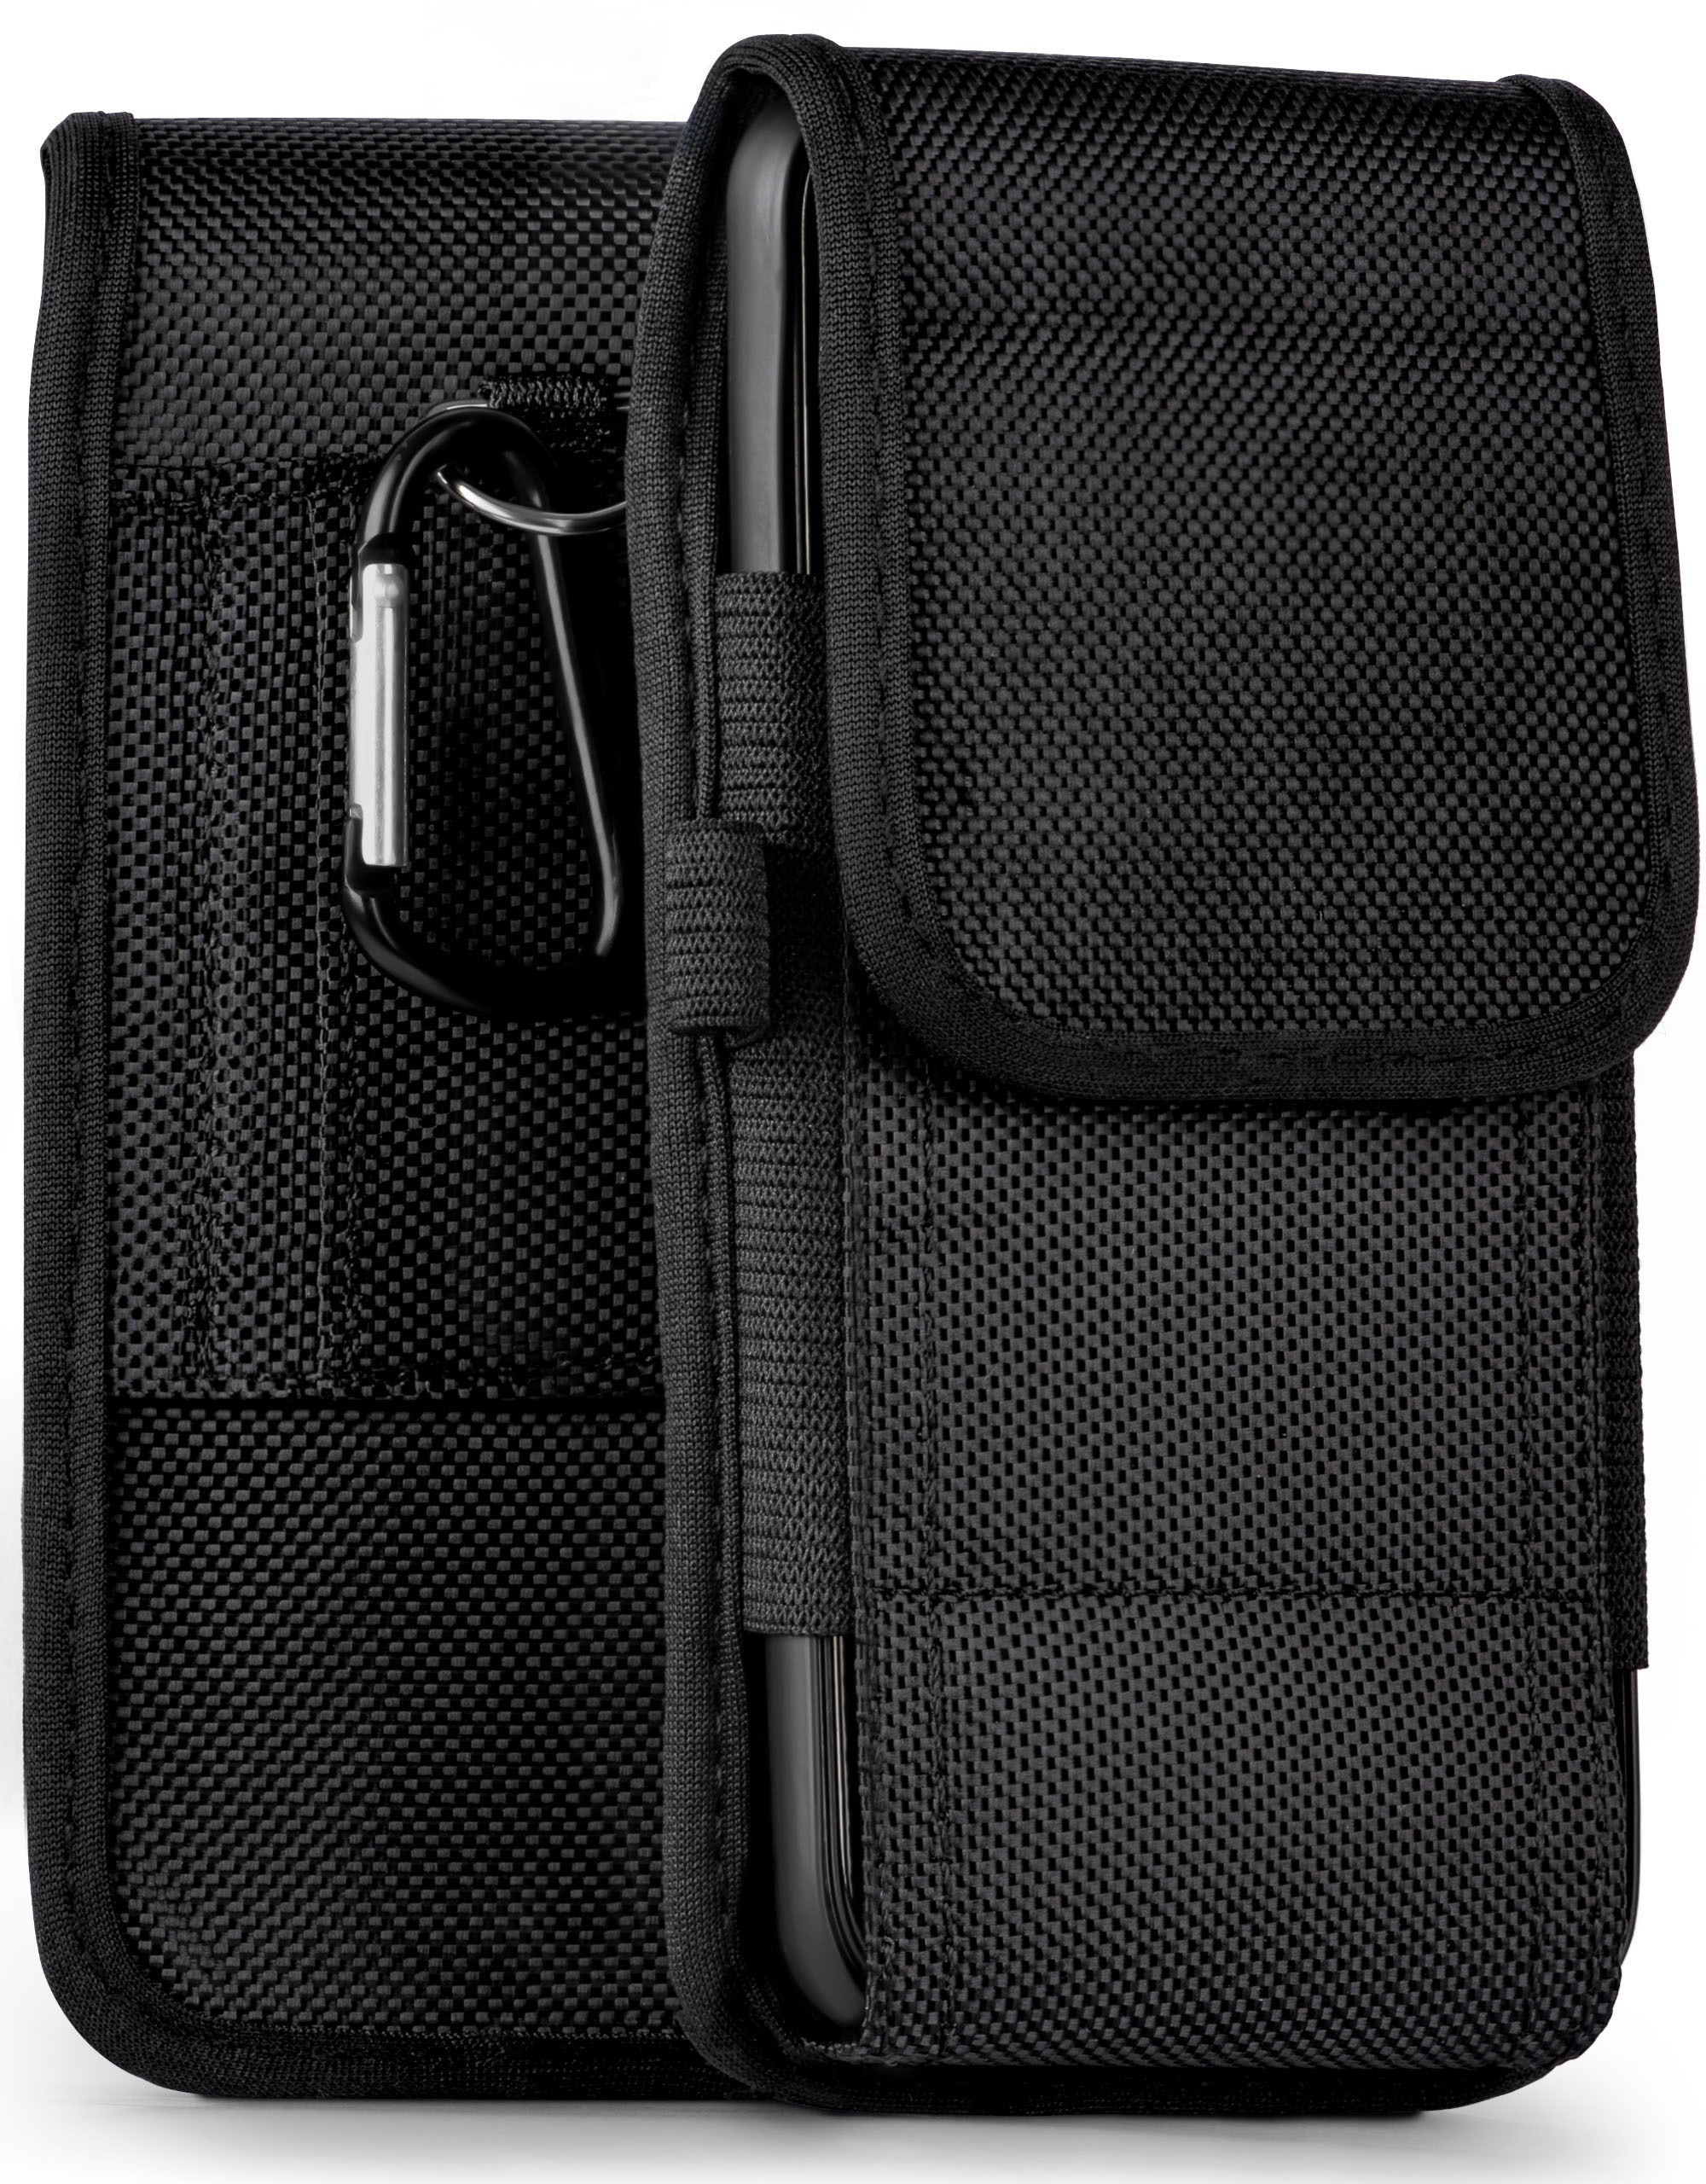 Trail Emporia, SMART.4, MOEX Case, Holster, Agility